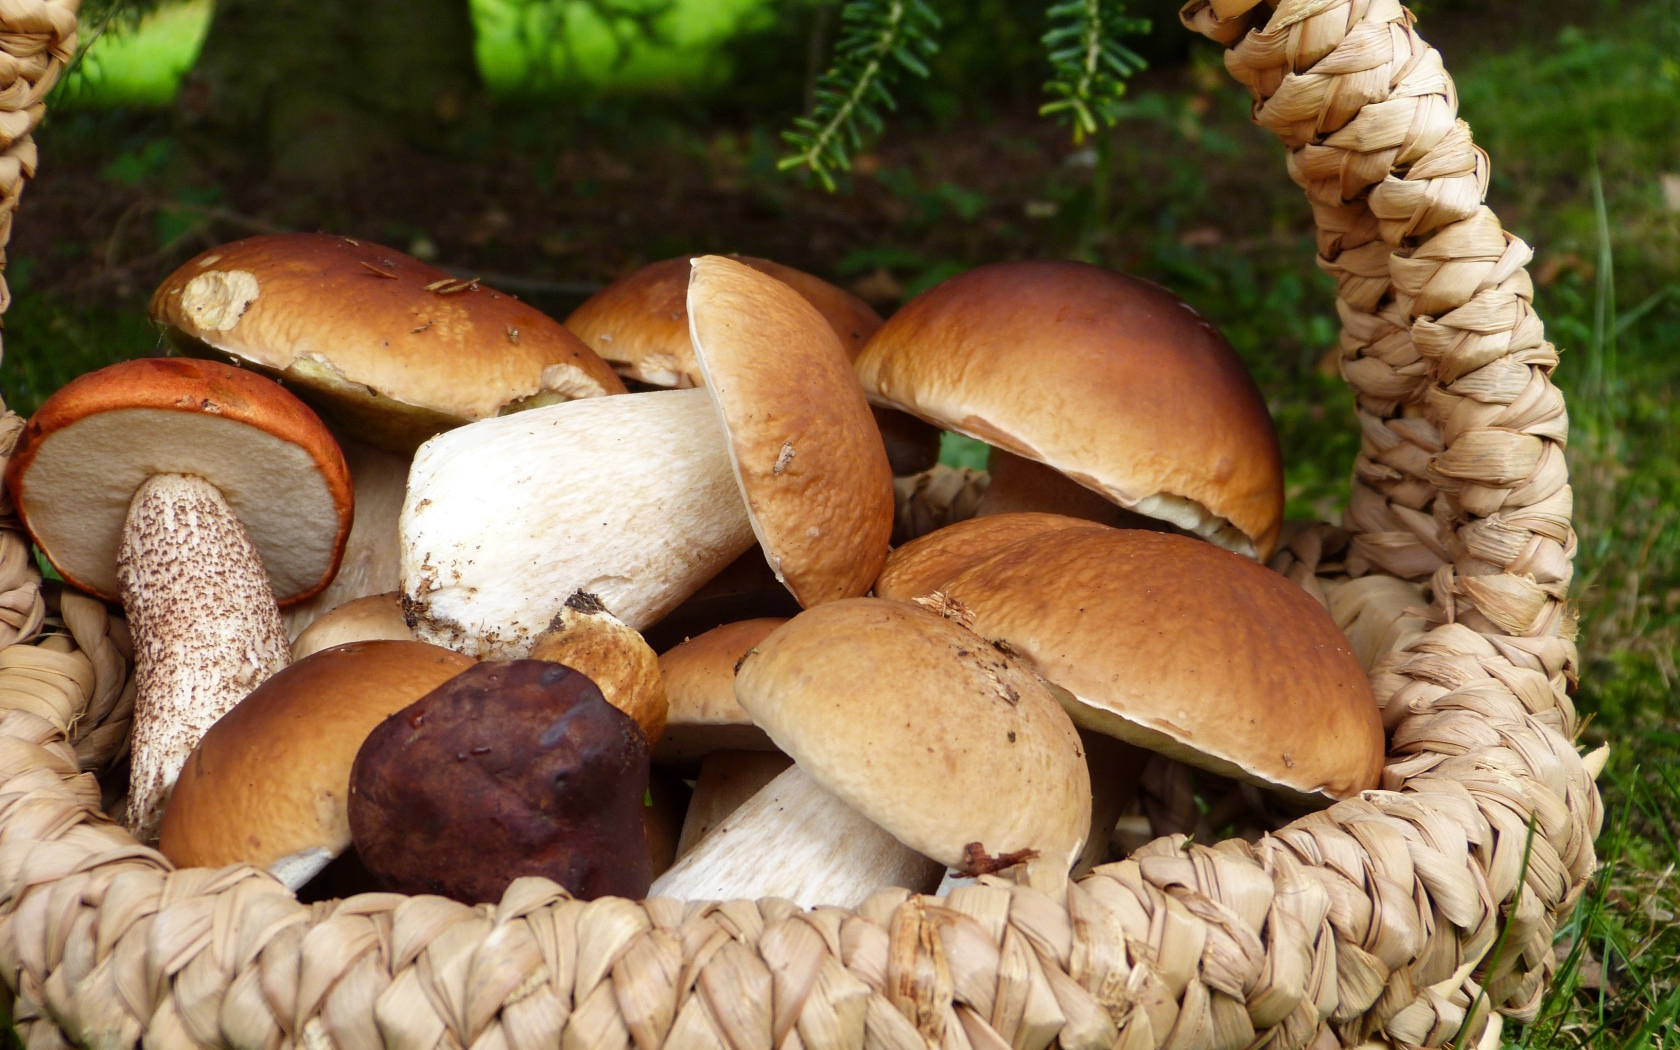 A basket of mushrooms stands on the grass in the forest